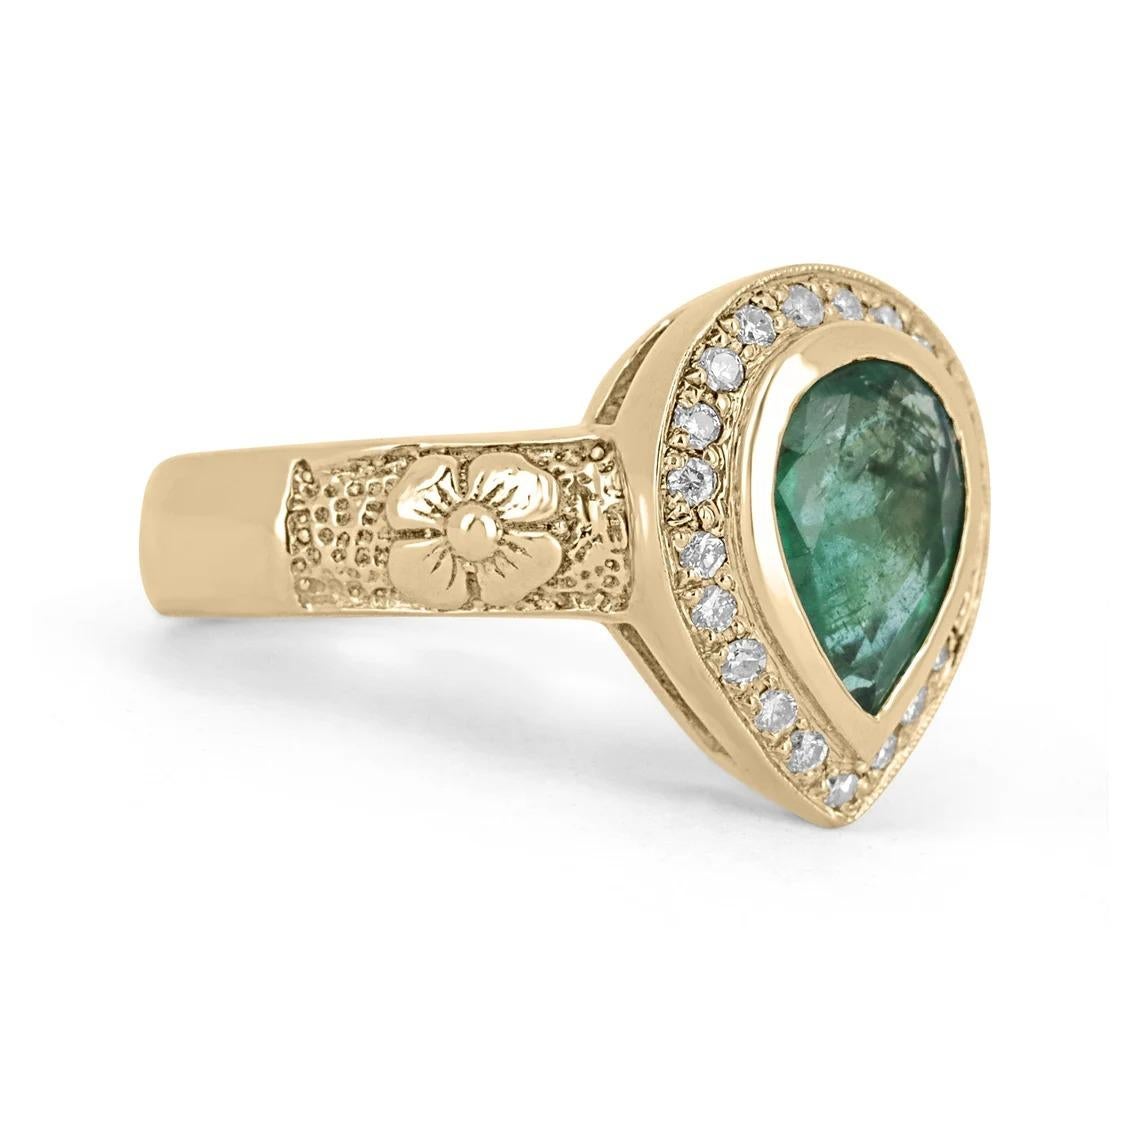 A stunning emerald and diamond right-hand ring. The gemstone carries a full 1.61-carat, pear-cut Zambian emerald with great color and qualities. Surrounding the emerald is a brilliant round cut diamond halo, pave set. An intricate floral design